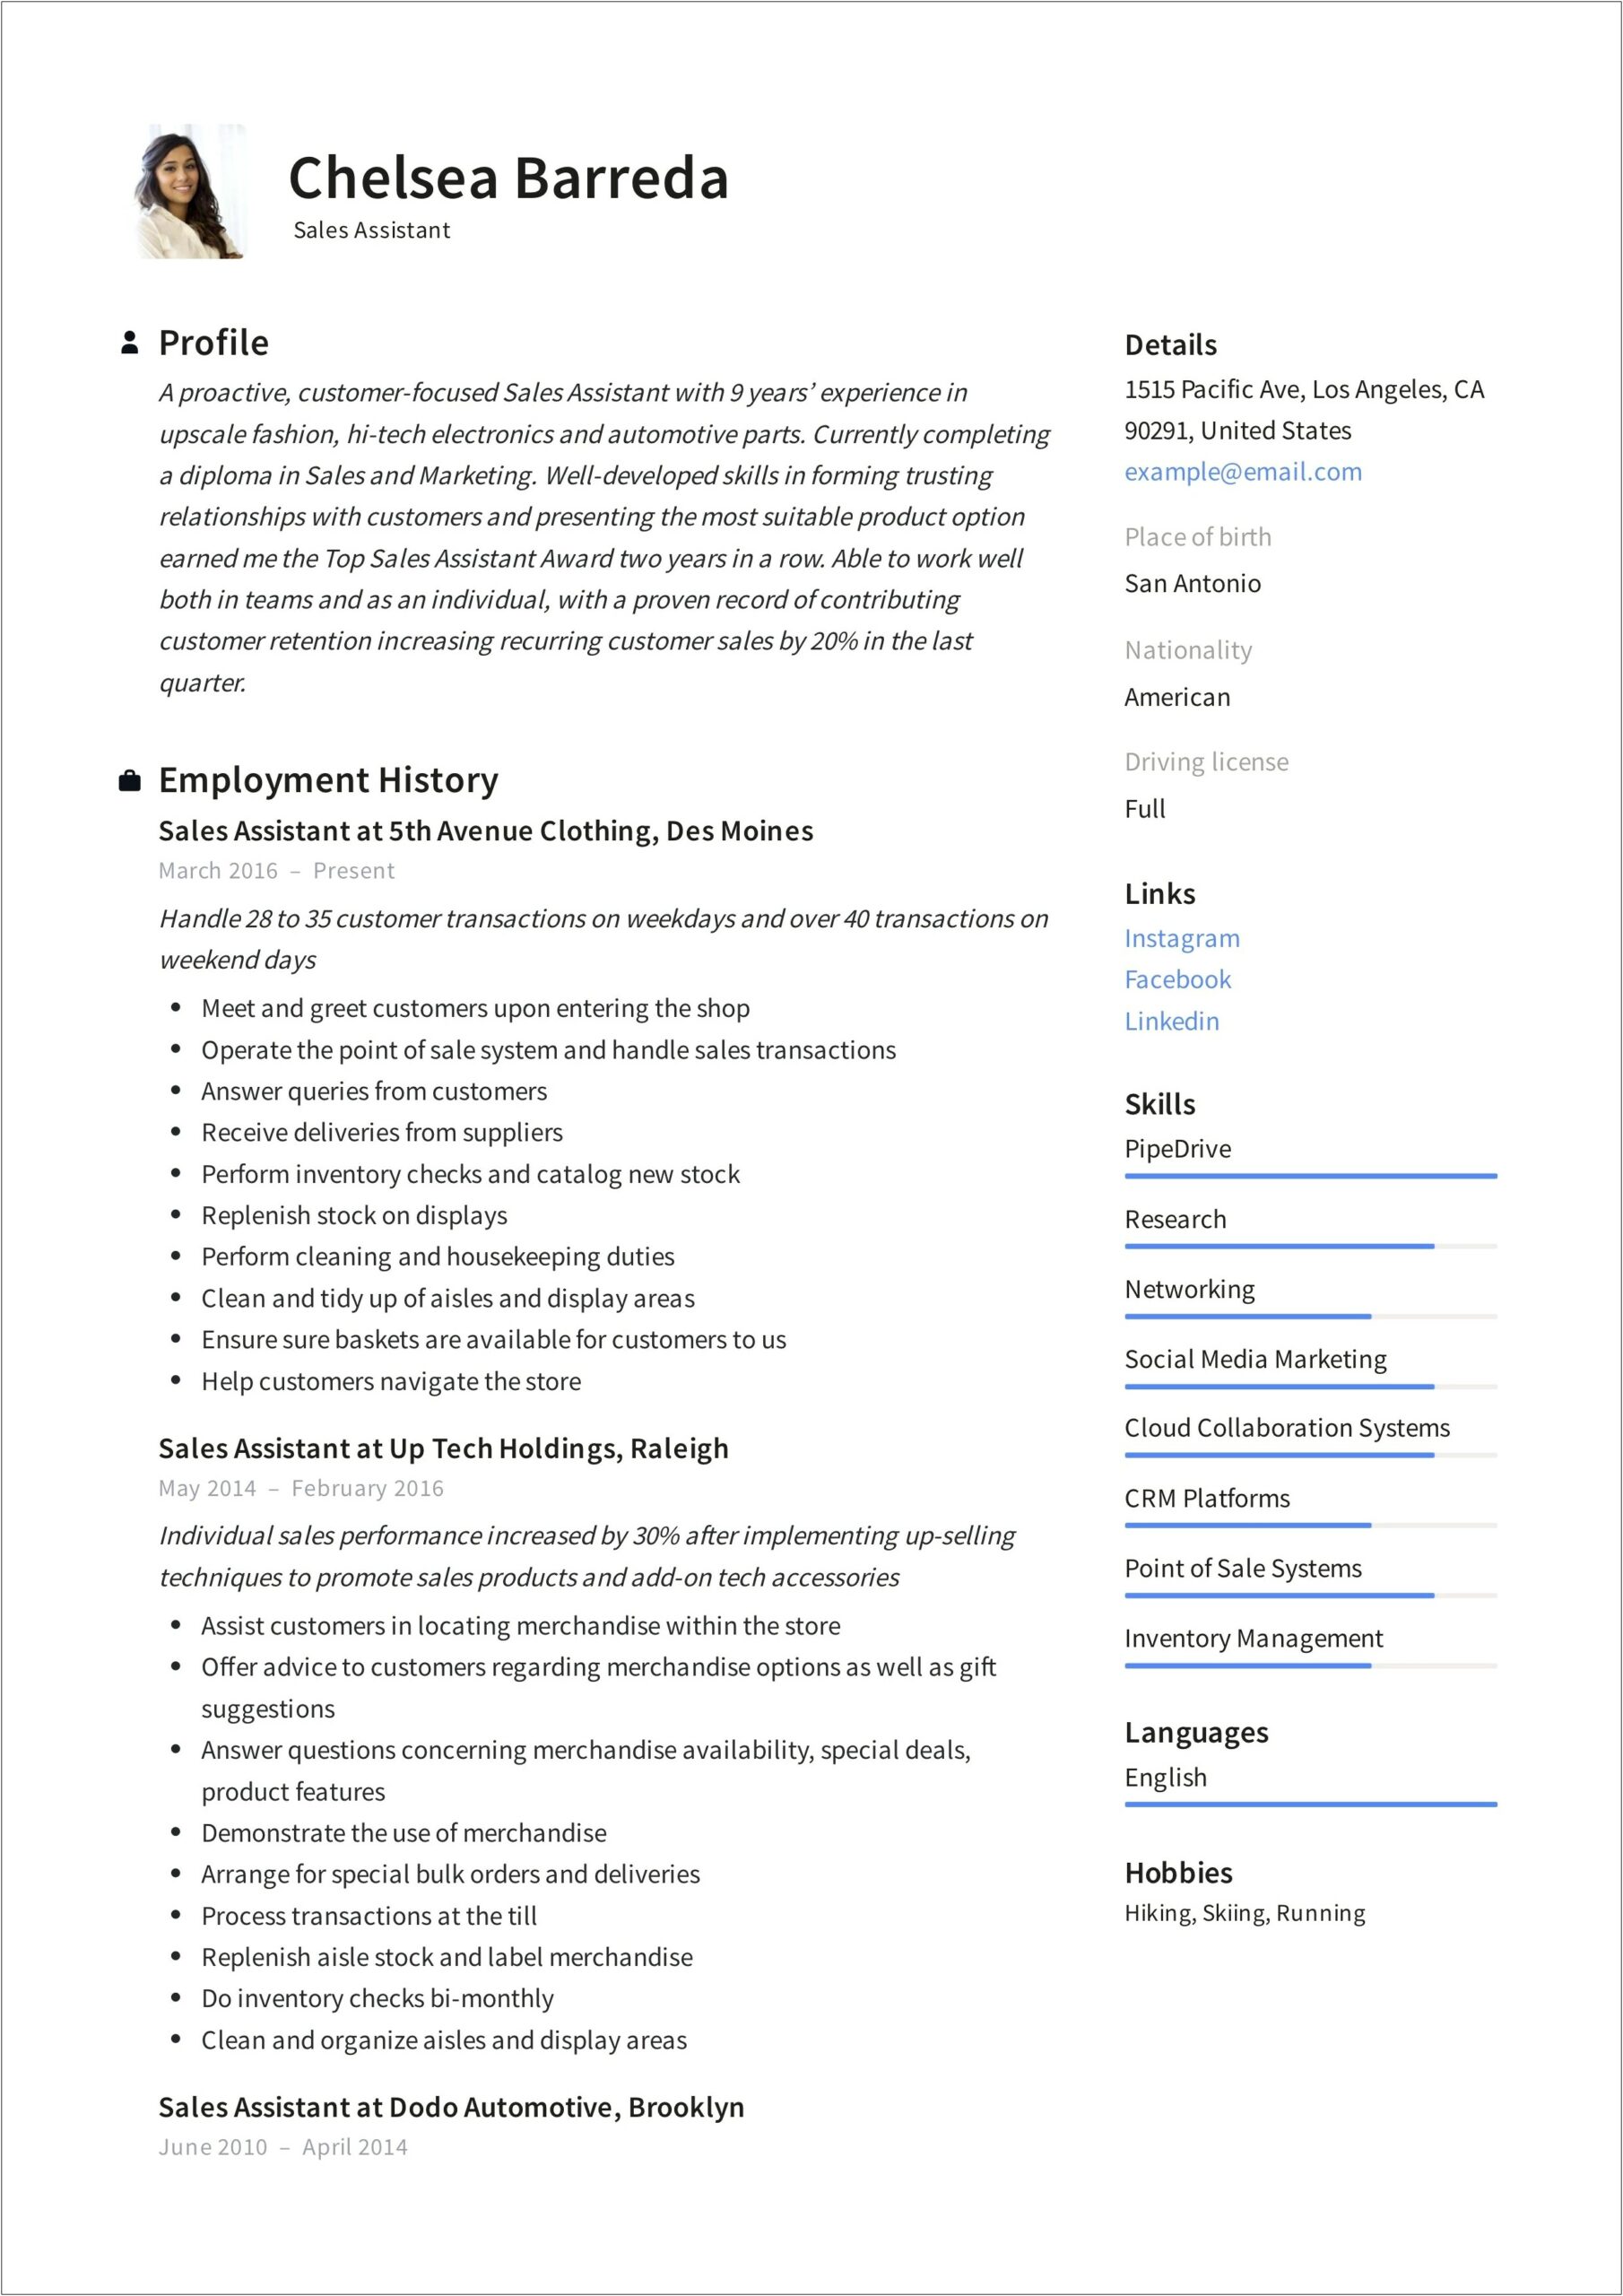 Writing A Resume With Crm Experience